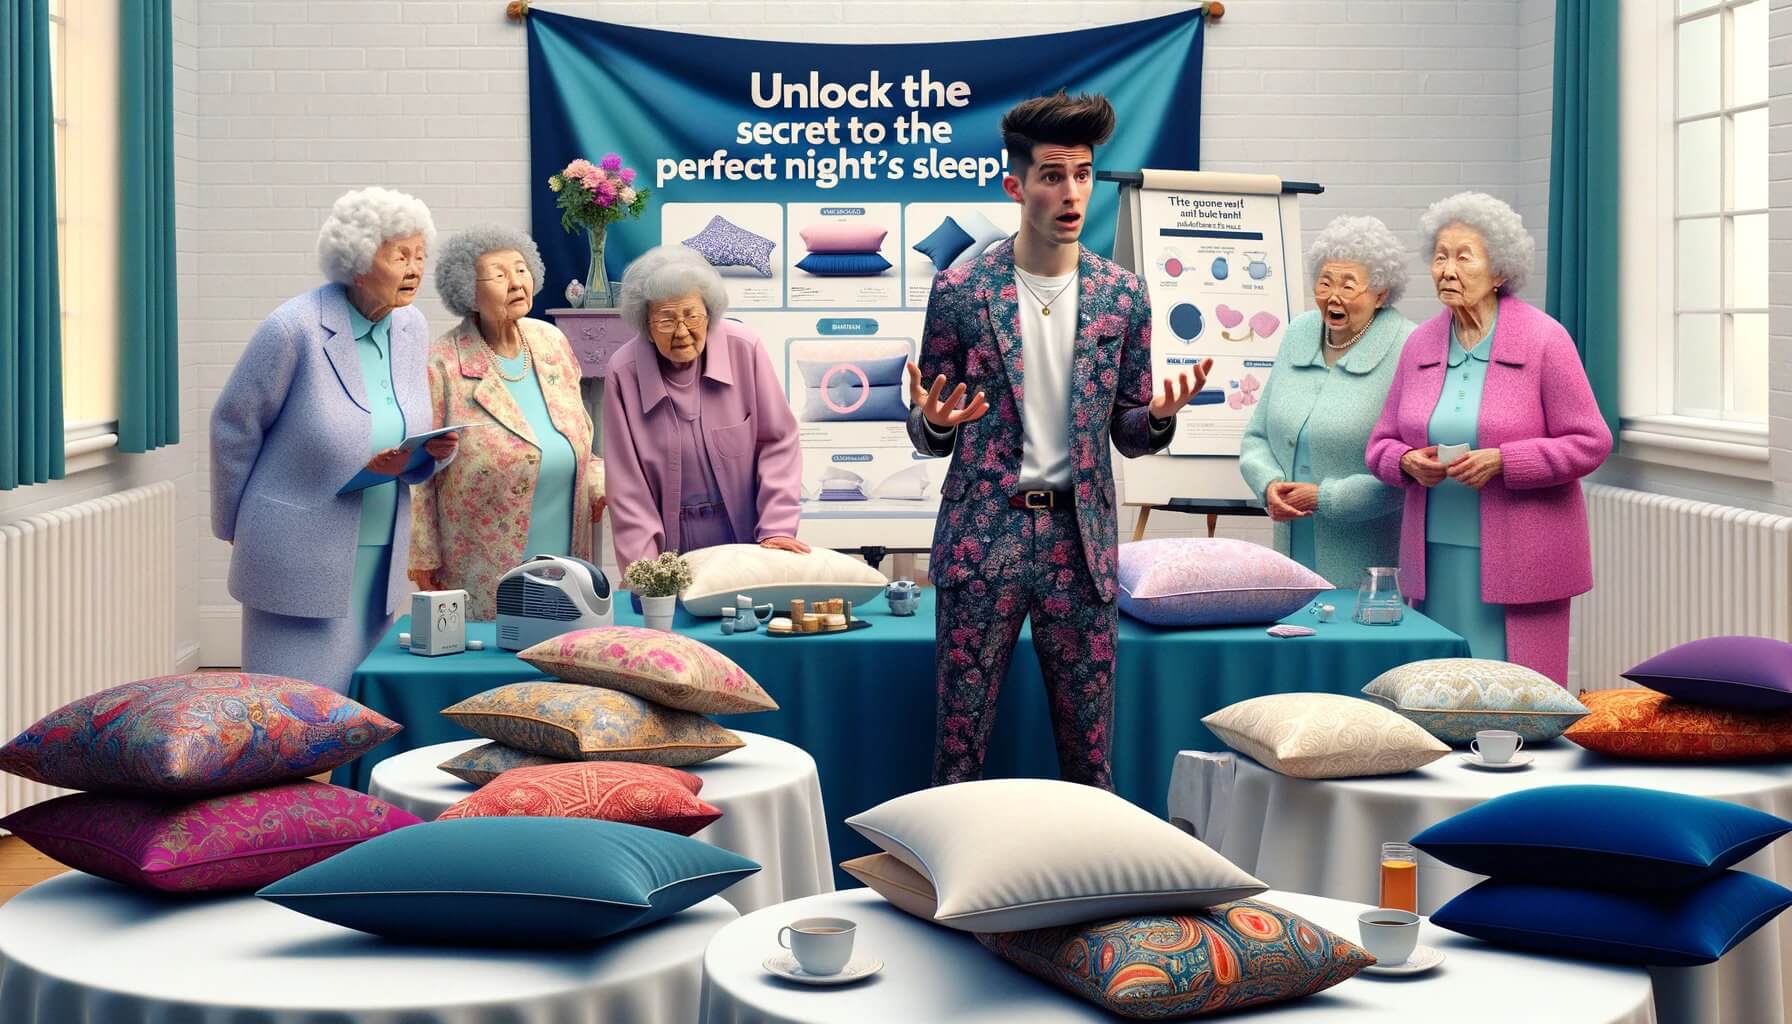 In a bright community hall, a young entrepreneur stands confused behind a podium, surrounded by grandmothers in floral and pastel outfits, inspecting the pillows